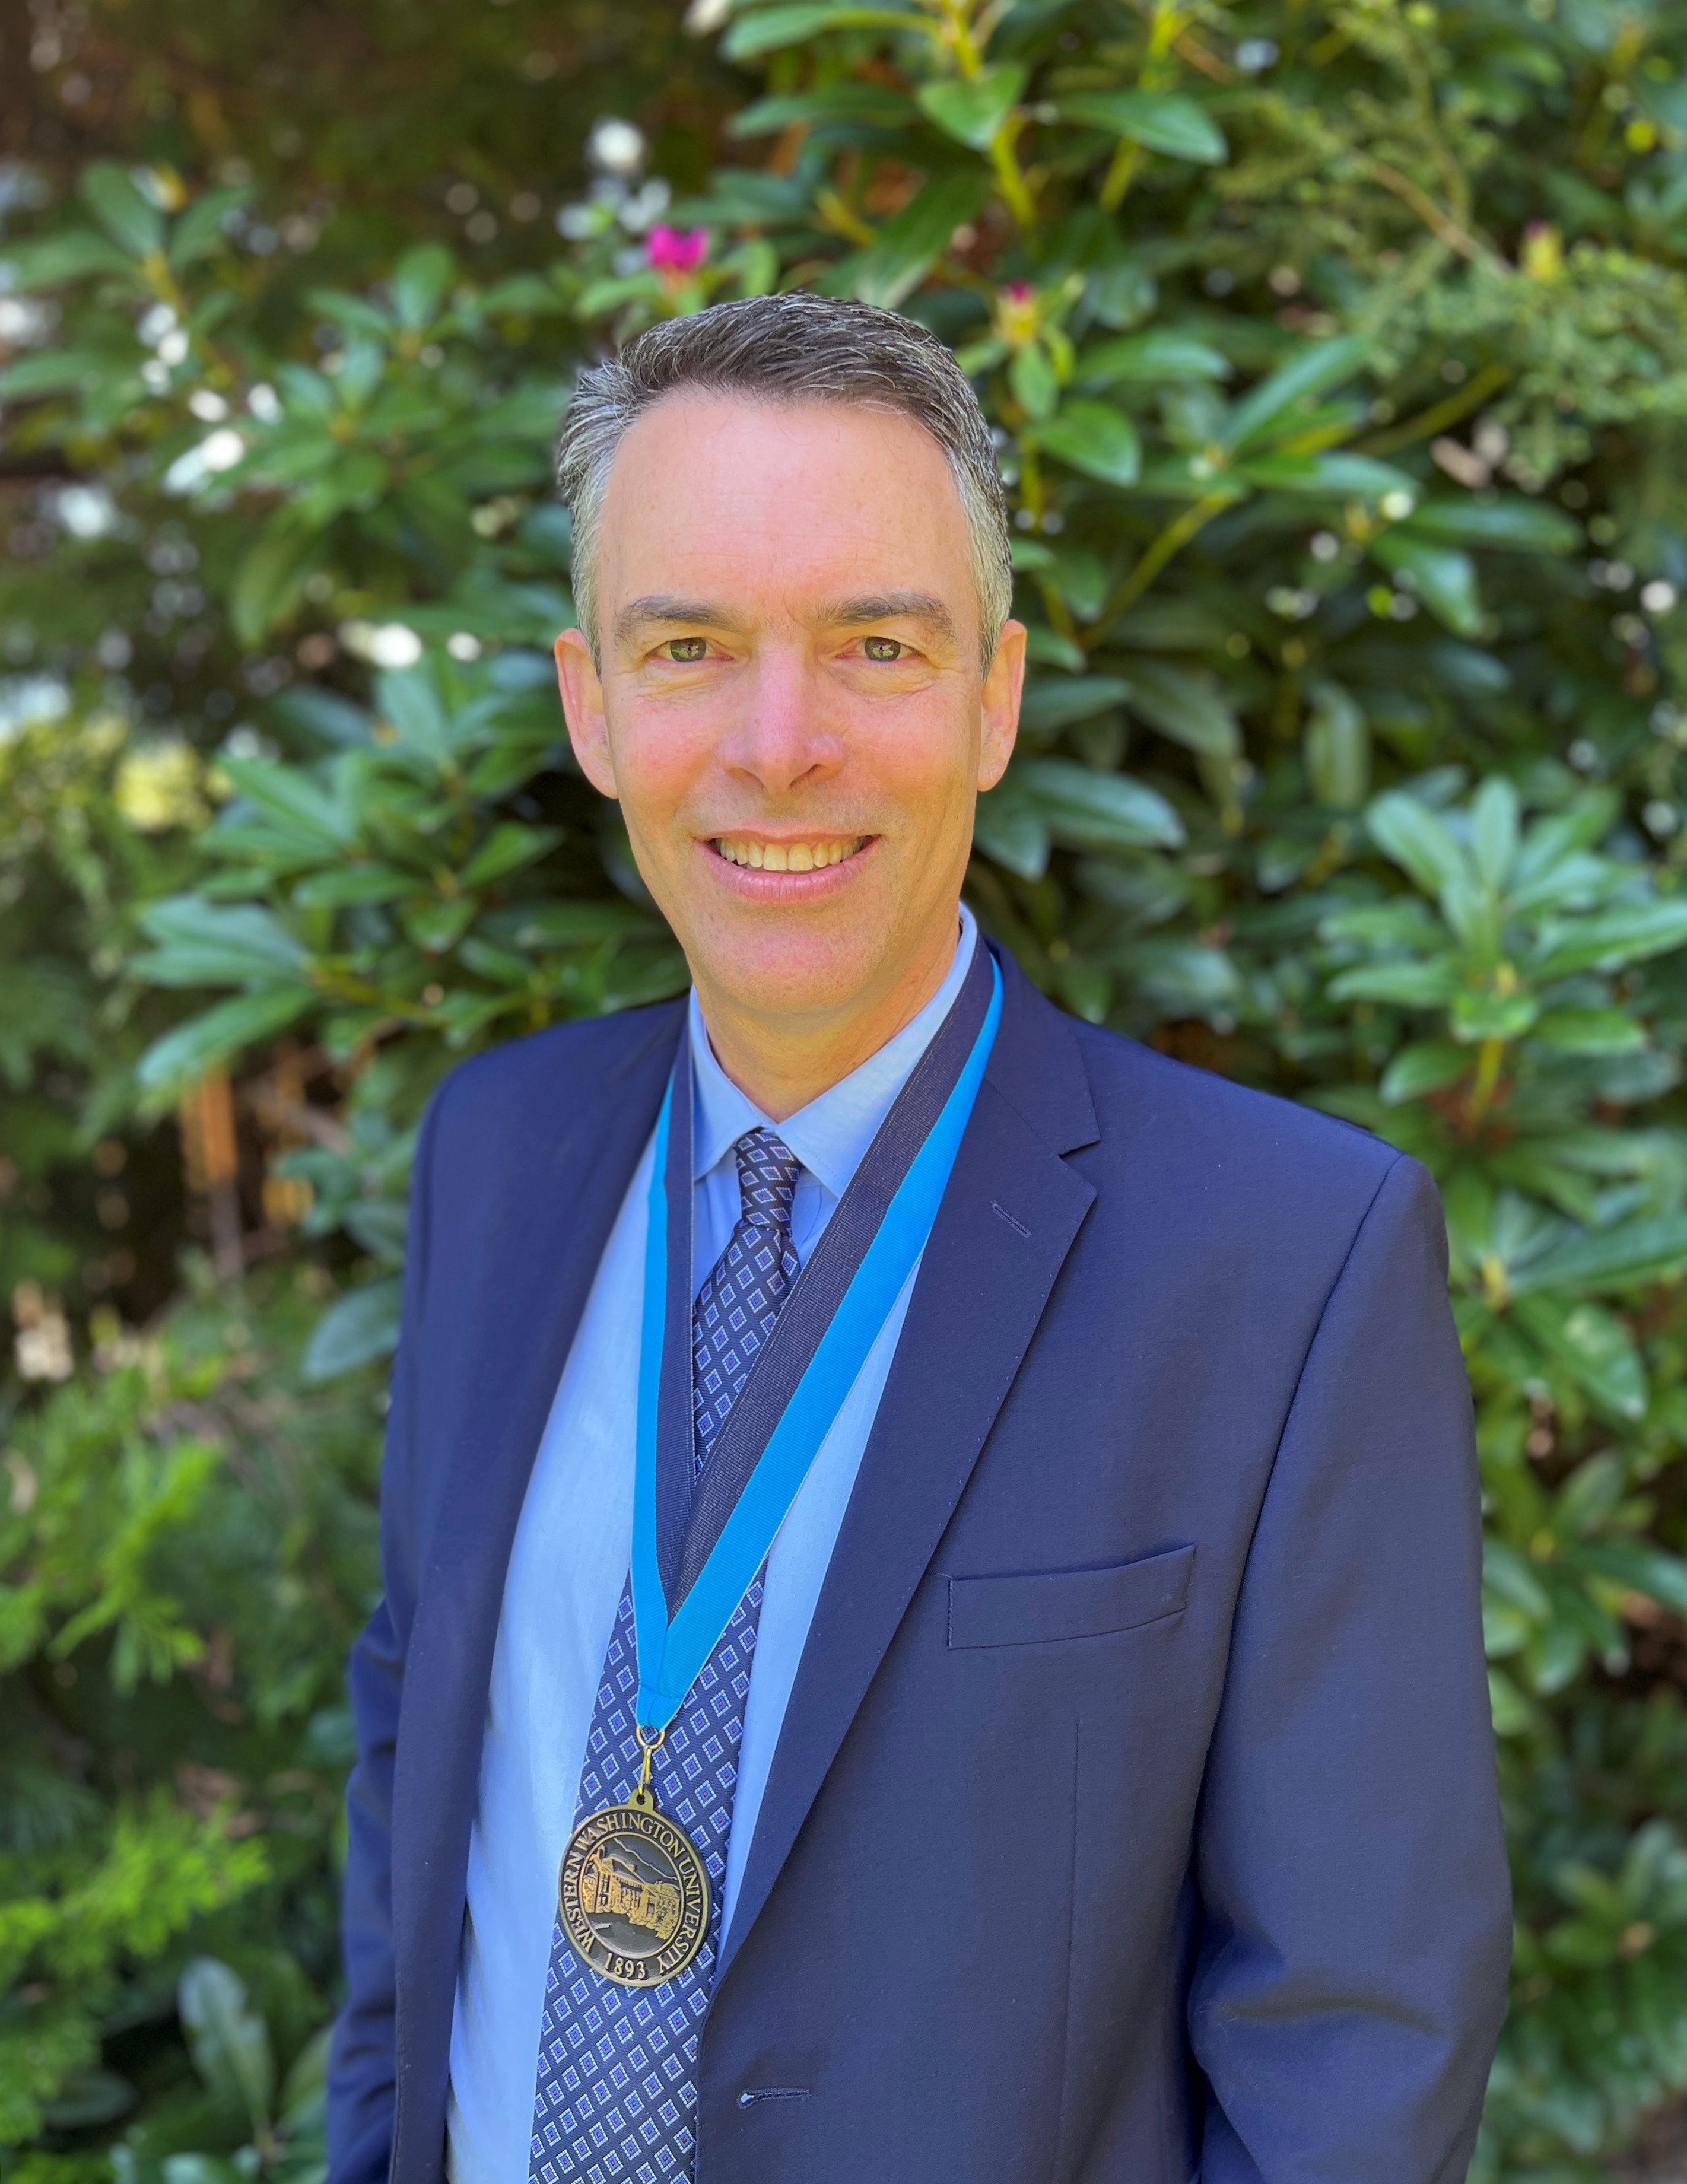 Photo of David Sattler wearing WWU award medallion with green trees in the background